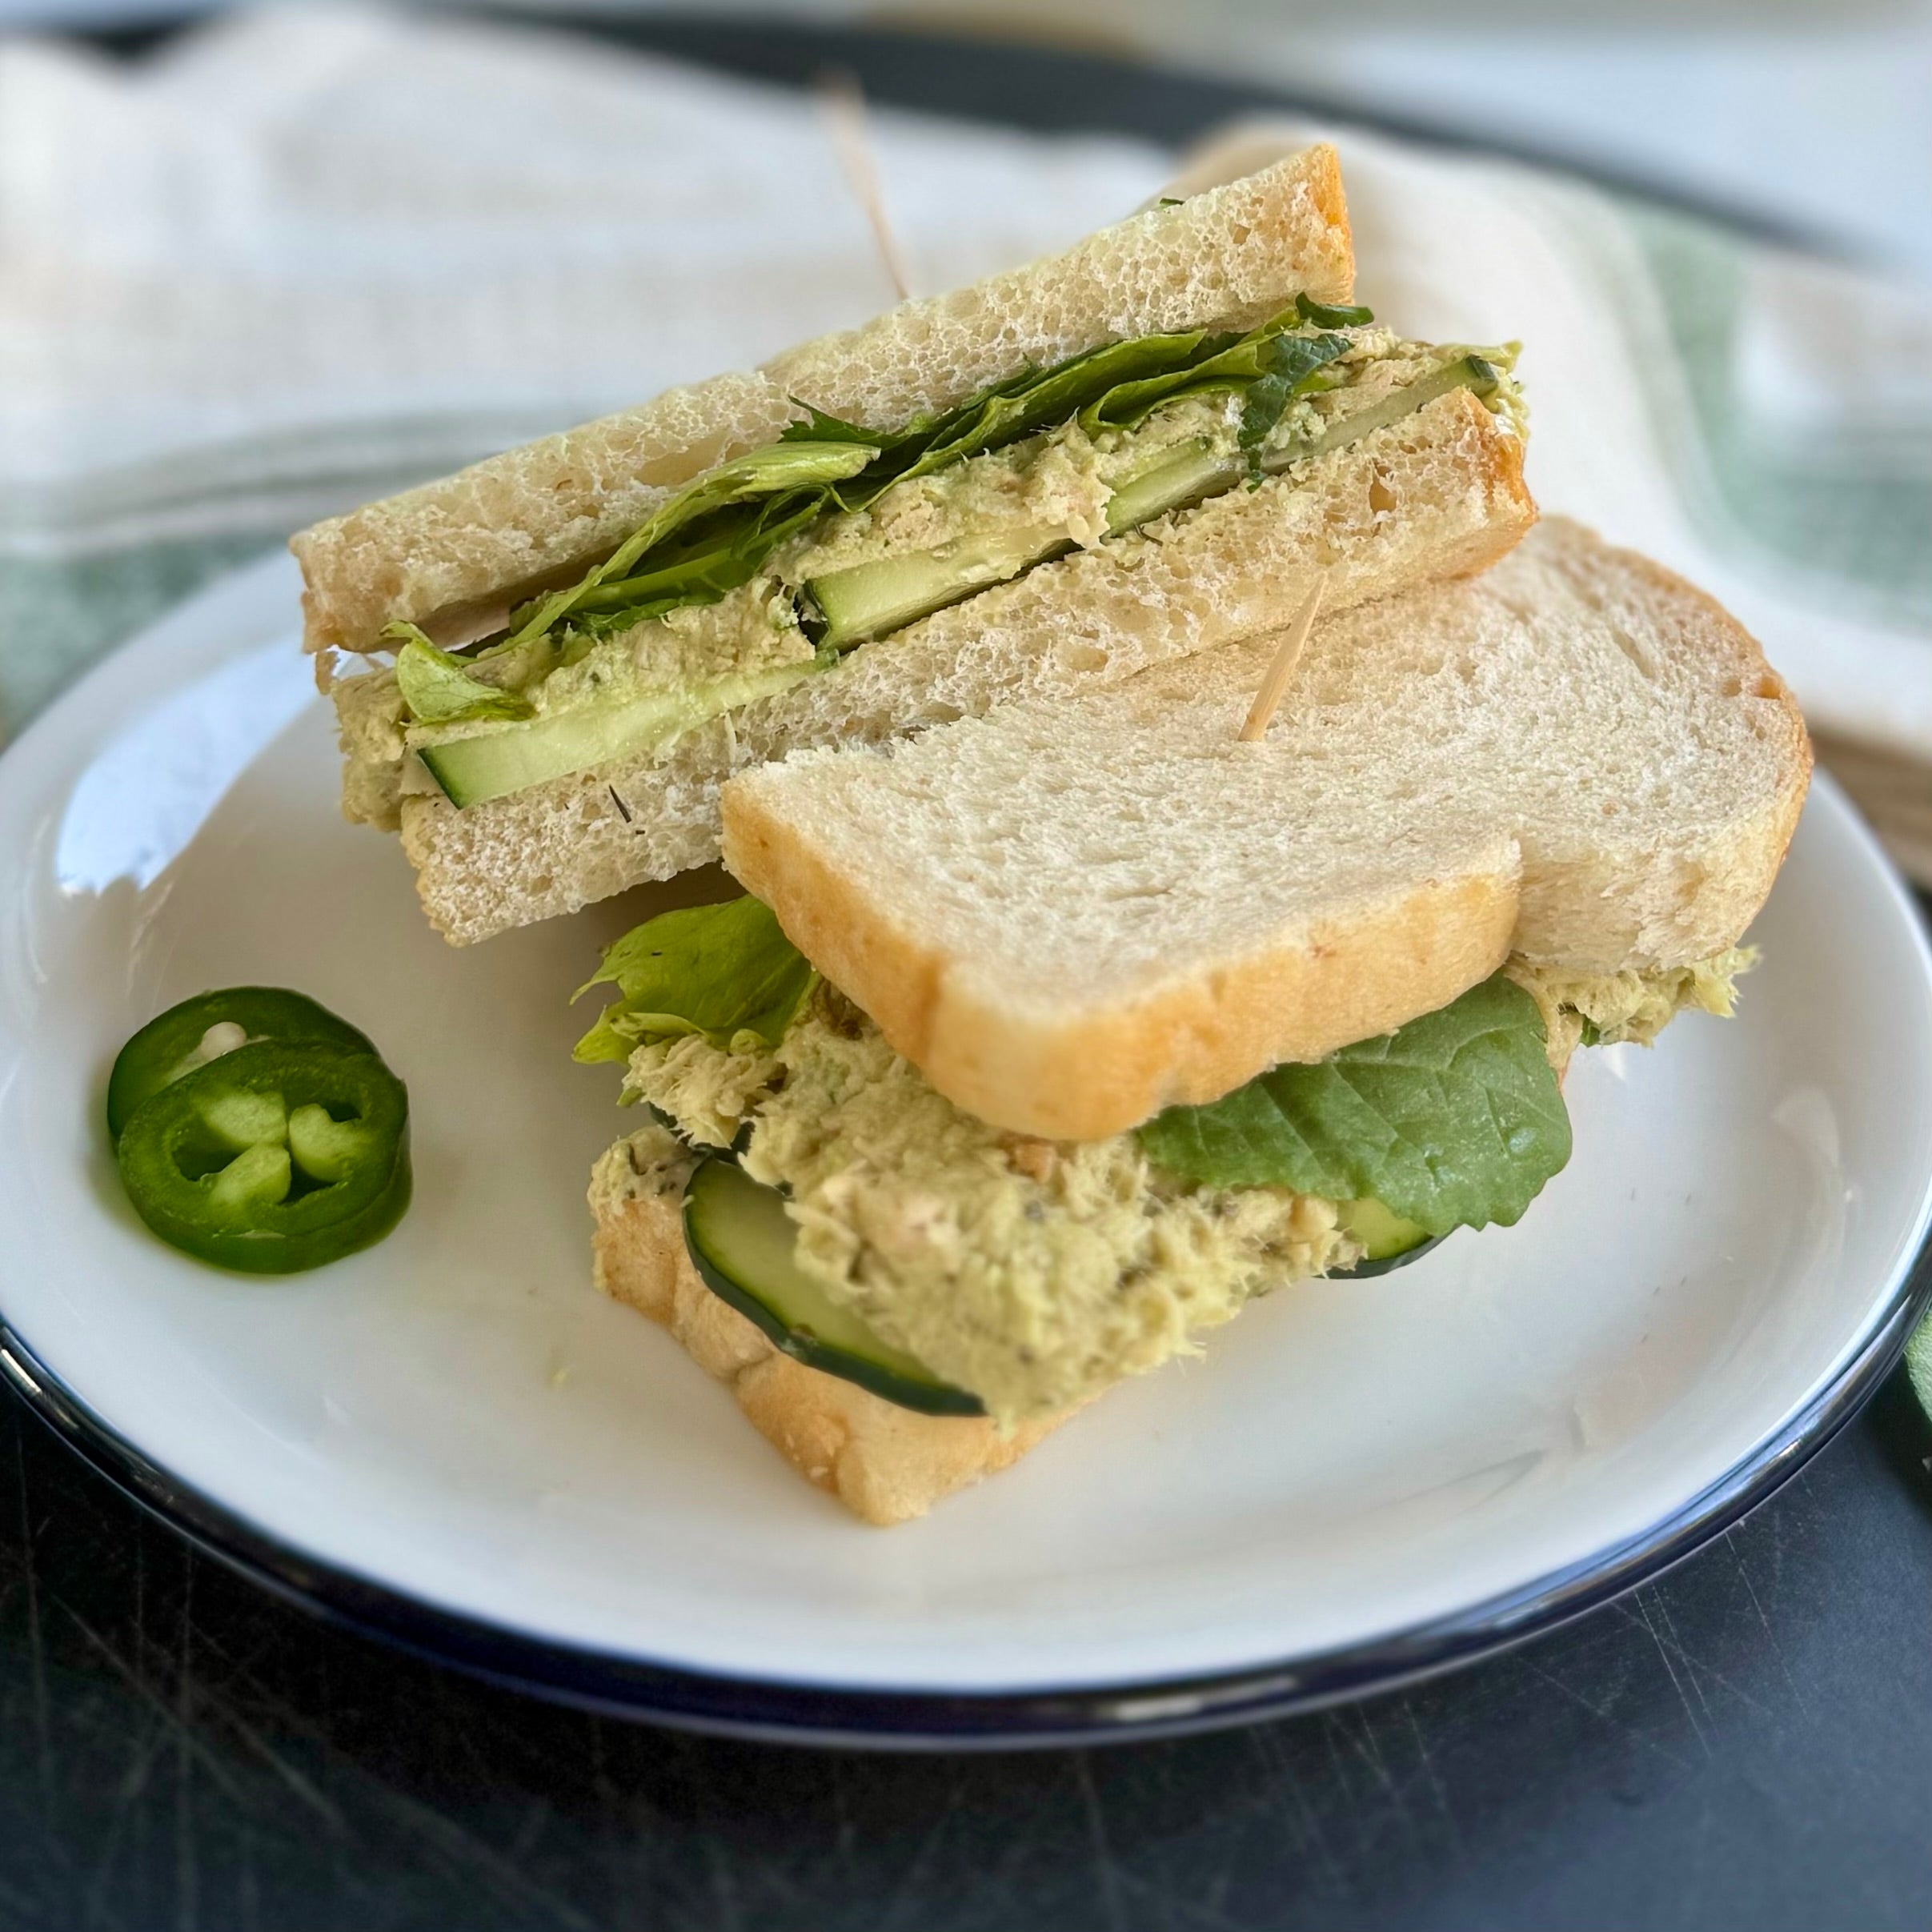 Light and fresh seafood sandwich, perfect for a Springtime lunch